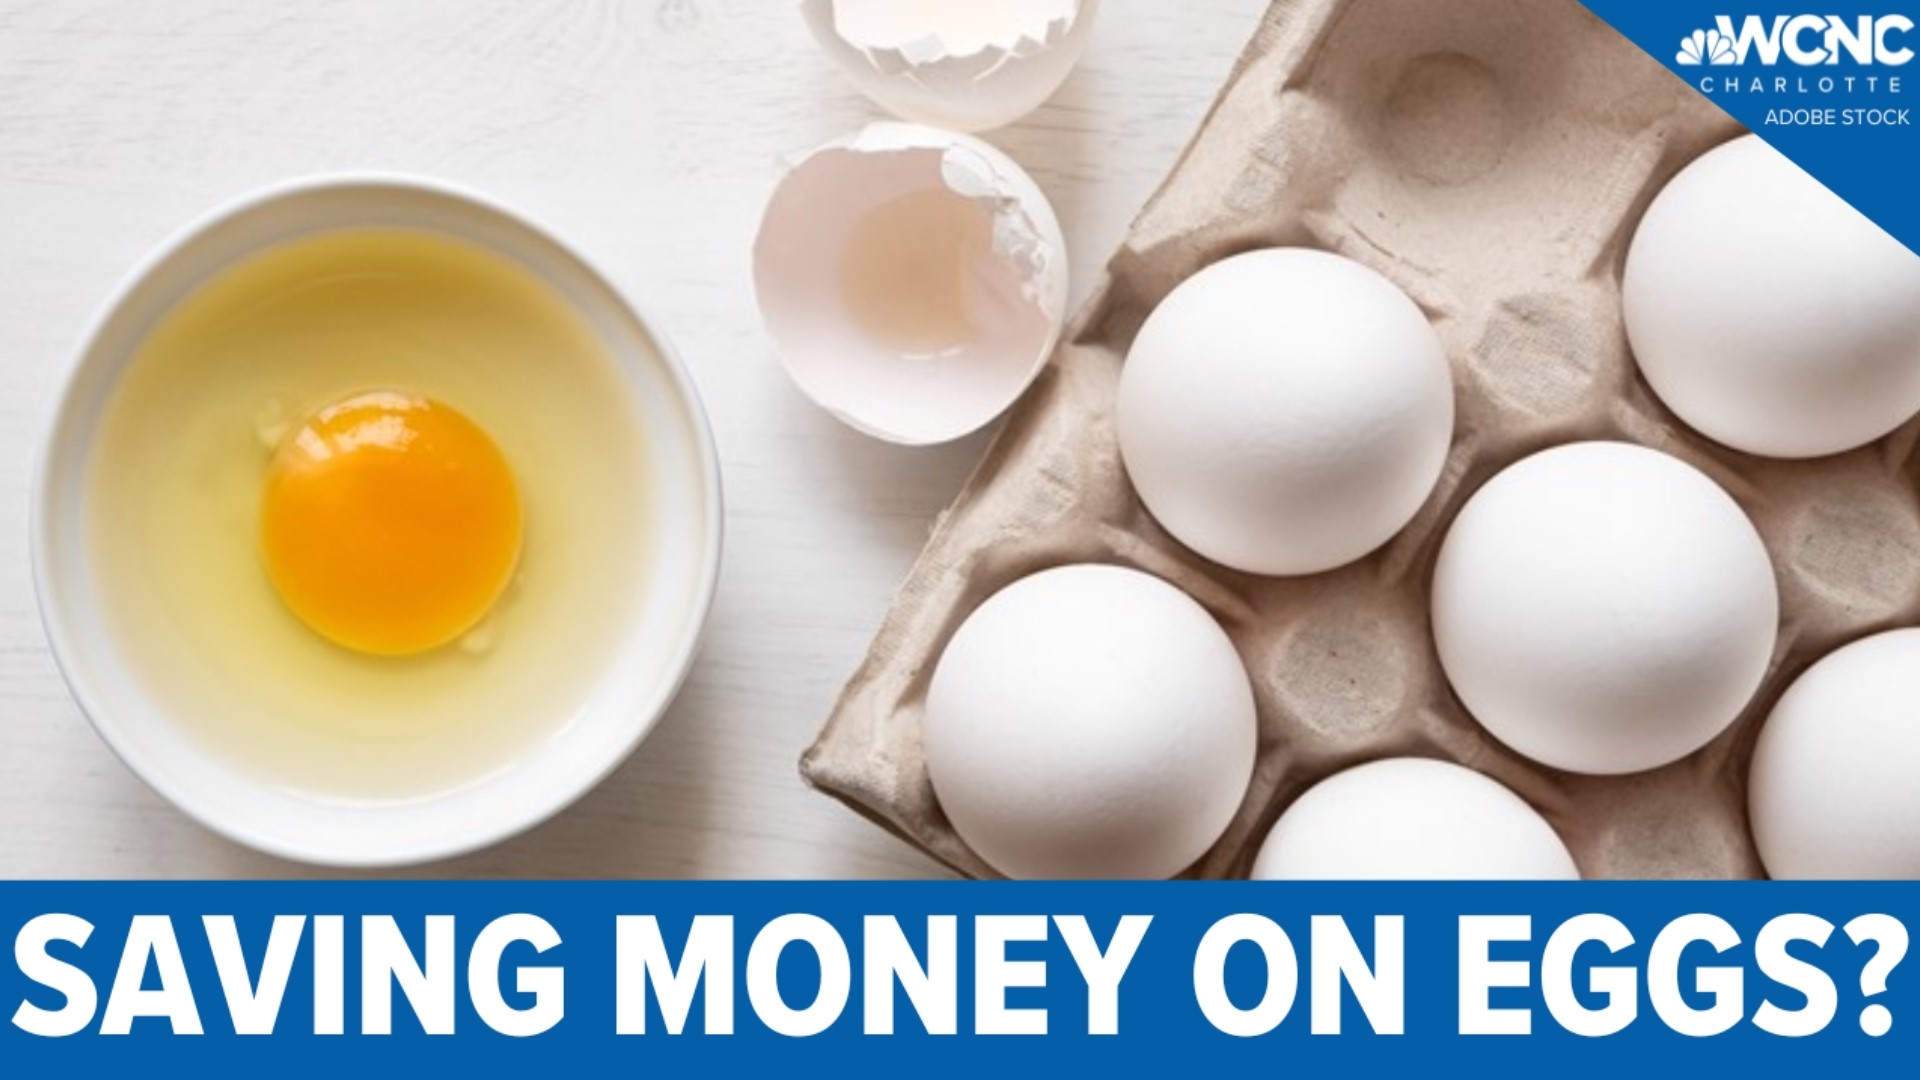 Rising egg prices are cracking into many wallets, leading some to look for cost-saving hacks for kitchen staples.